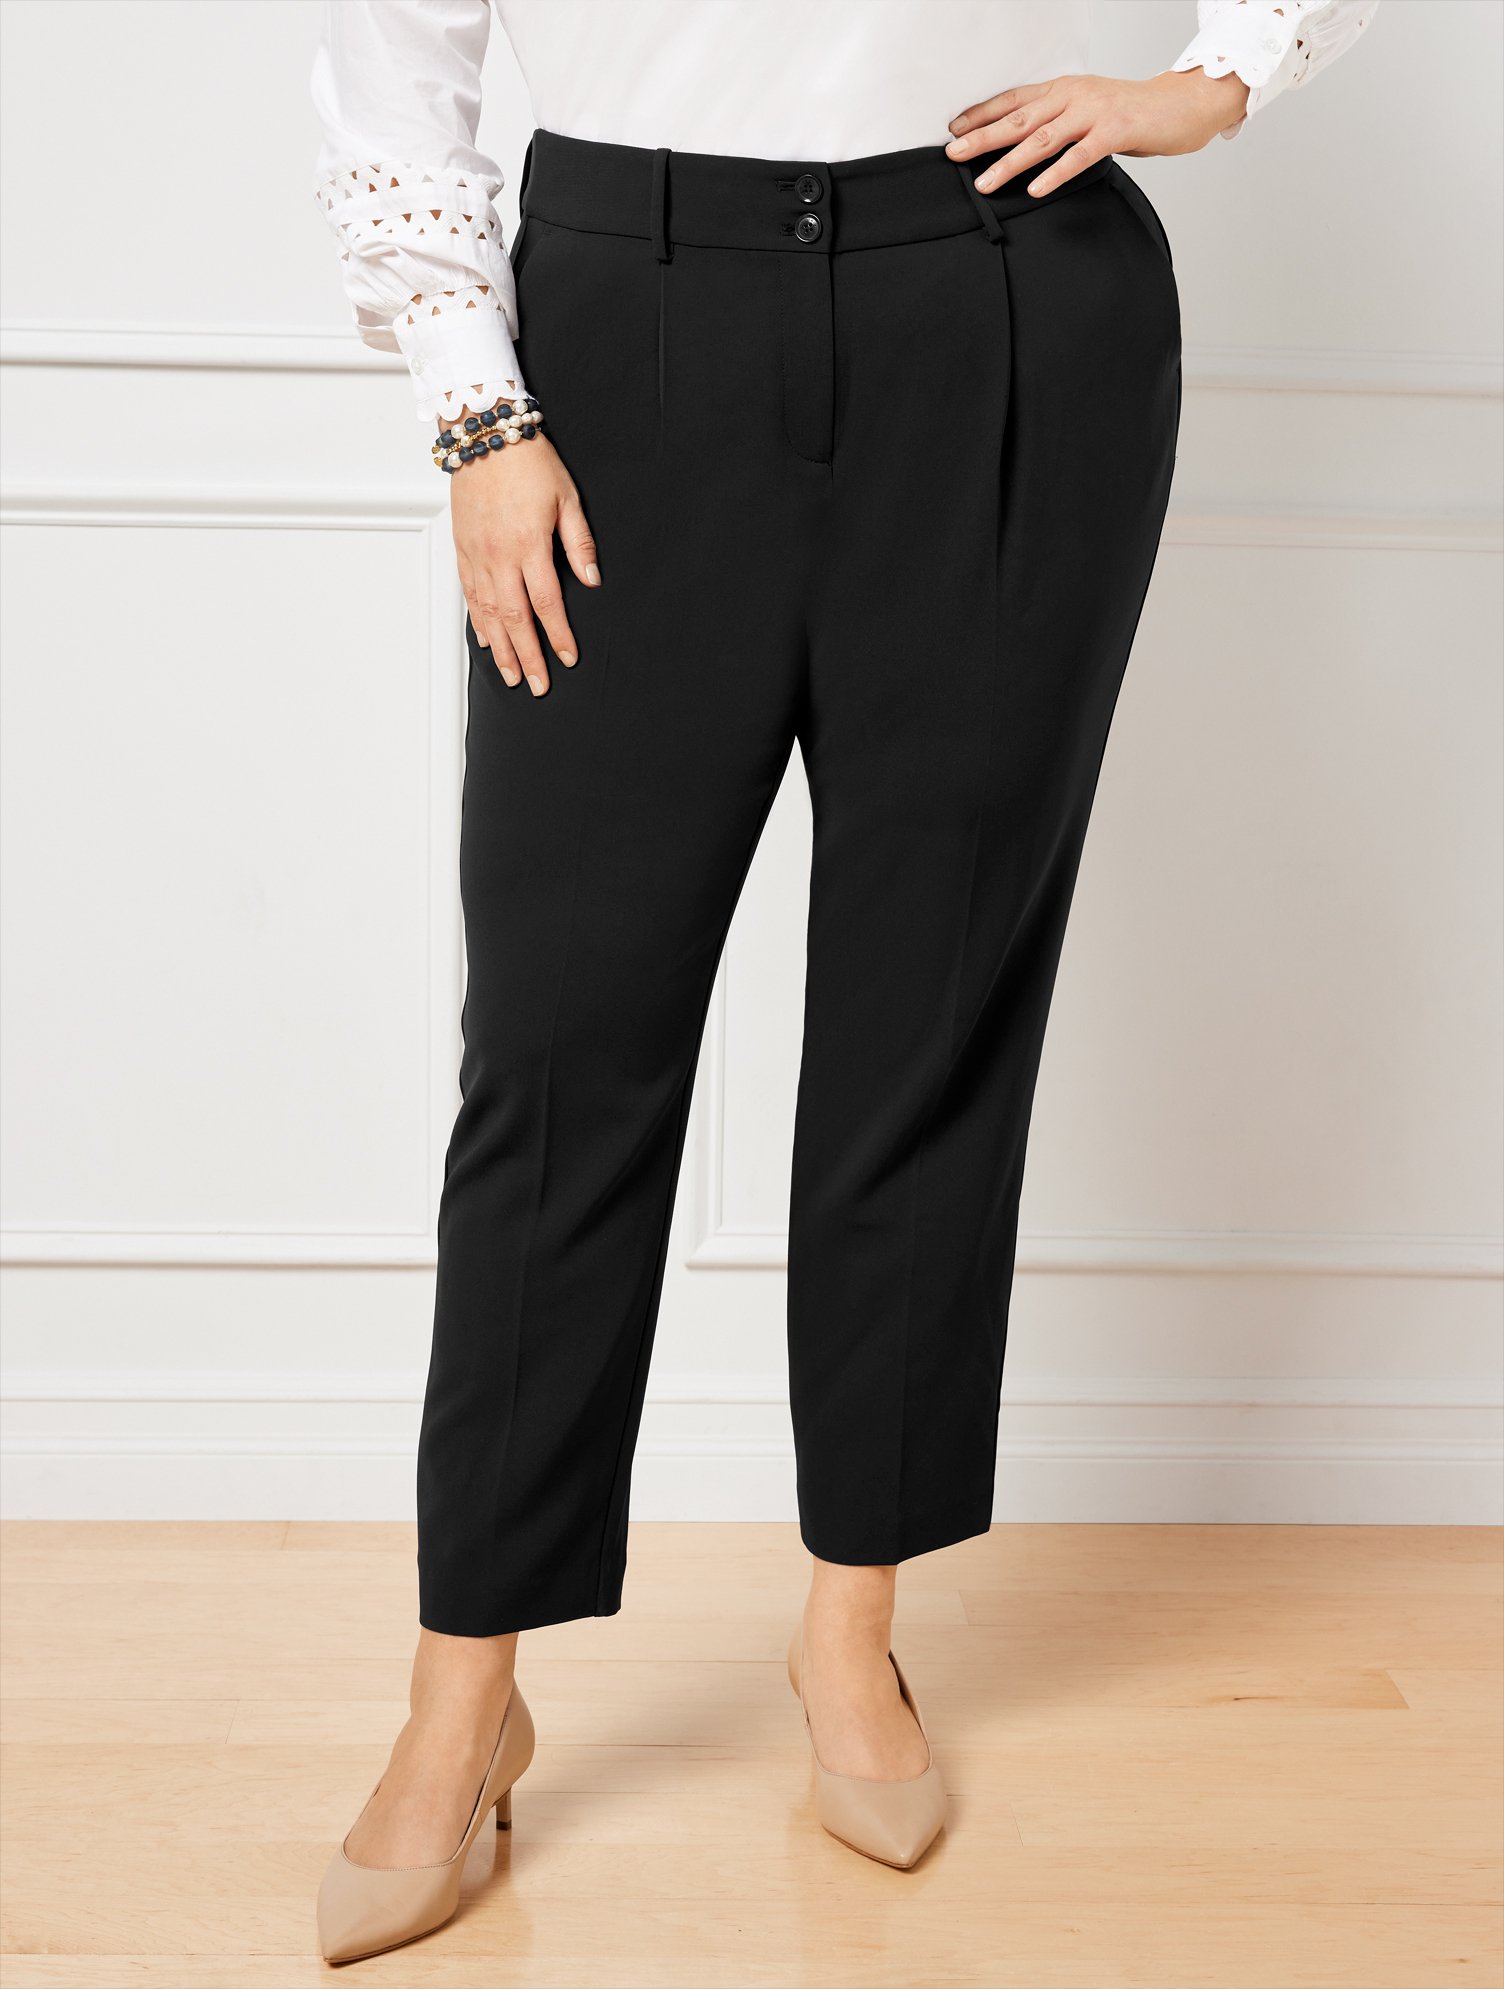 Talbots Easy Travel Tapered Ankle Pants - Black - 16